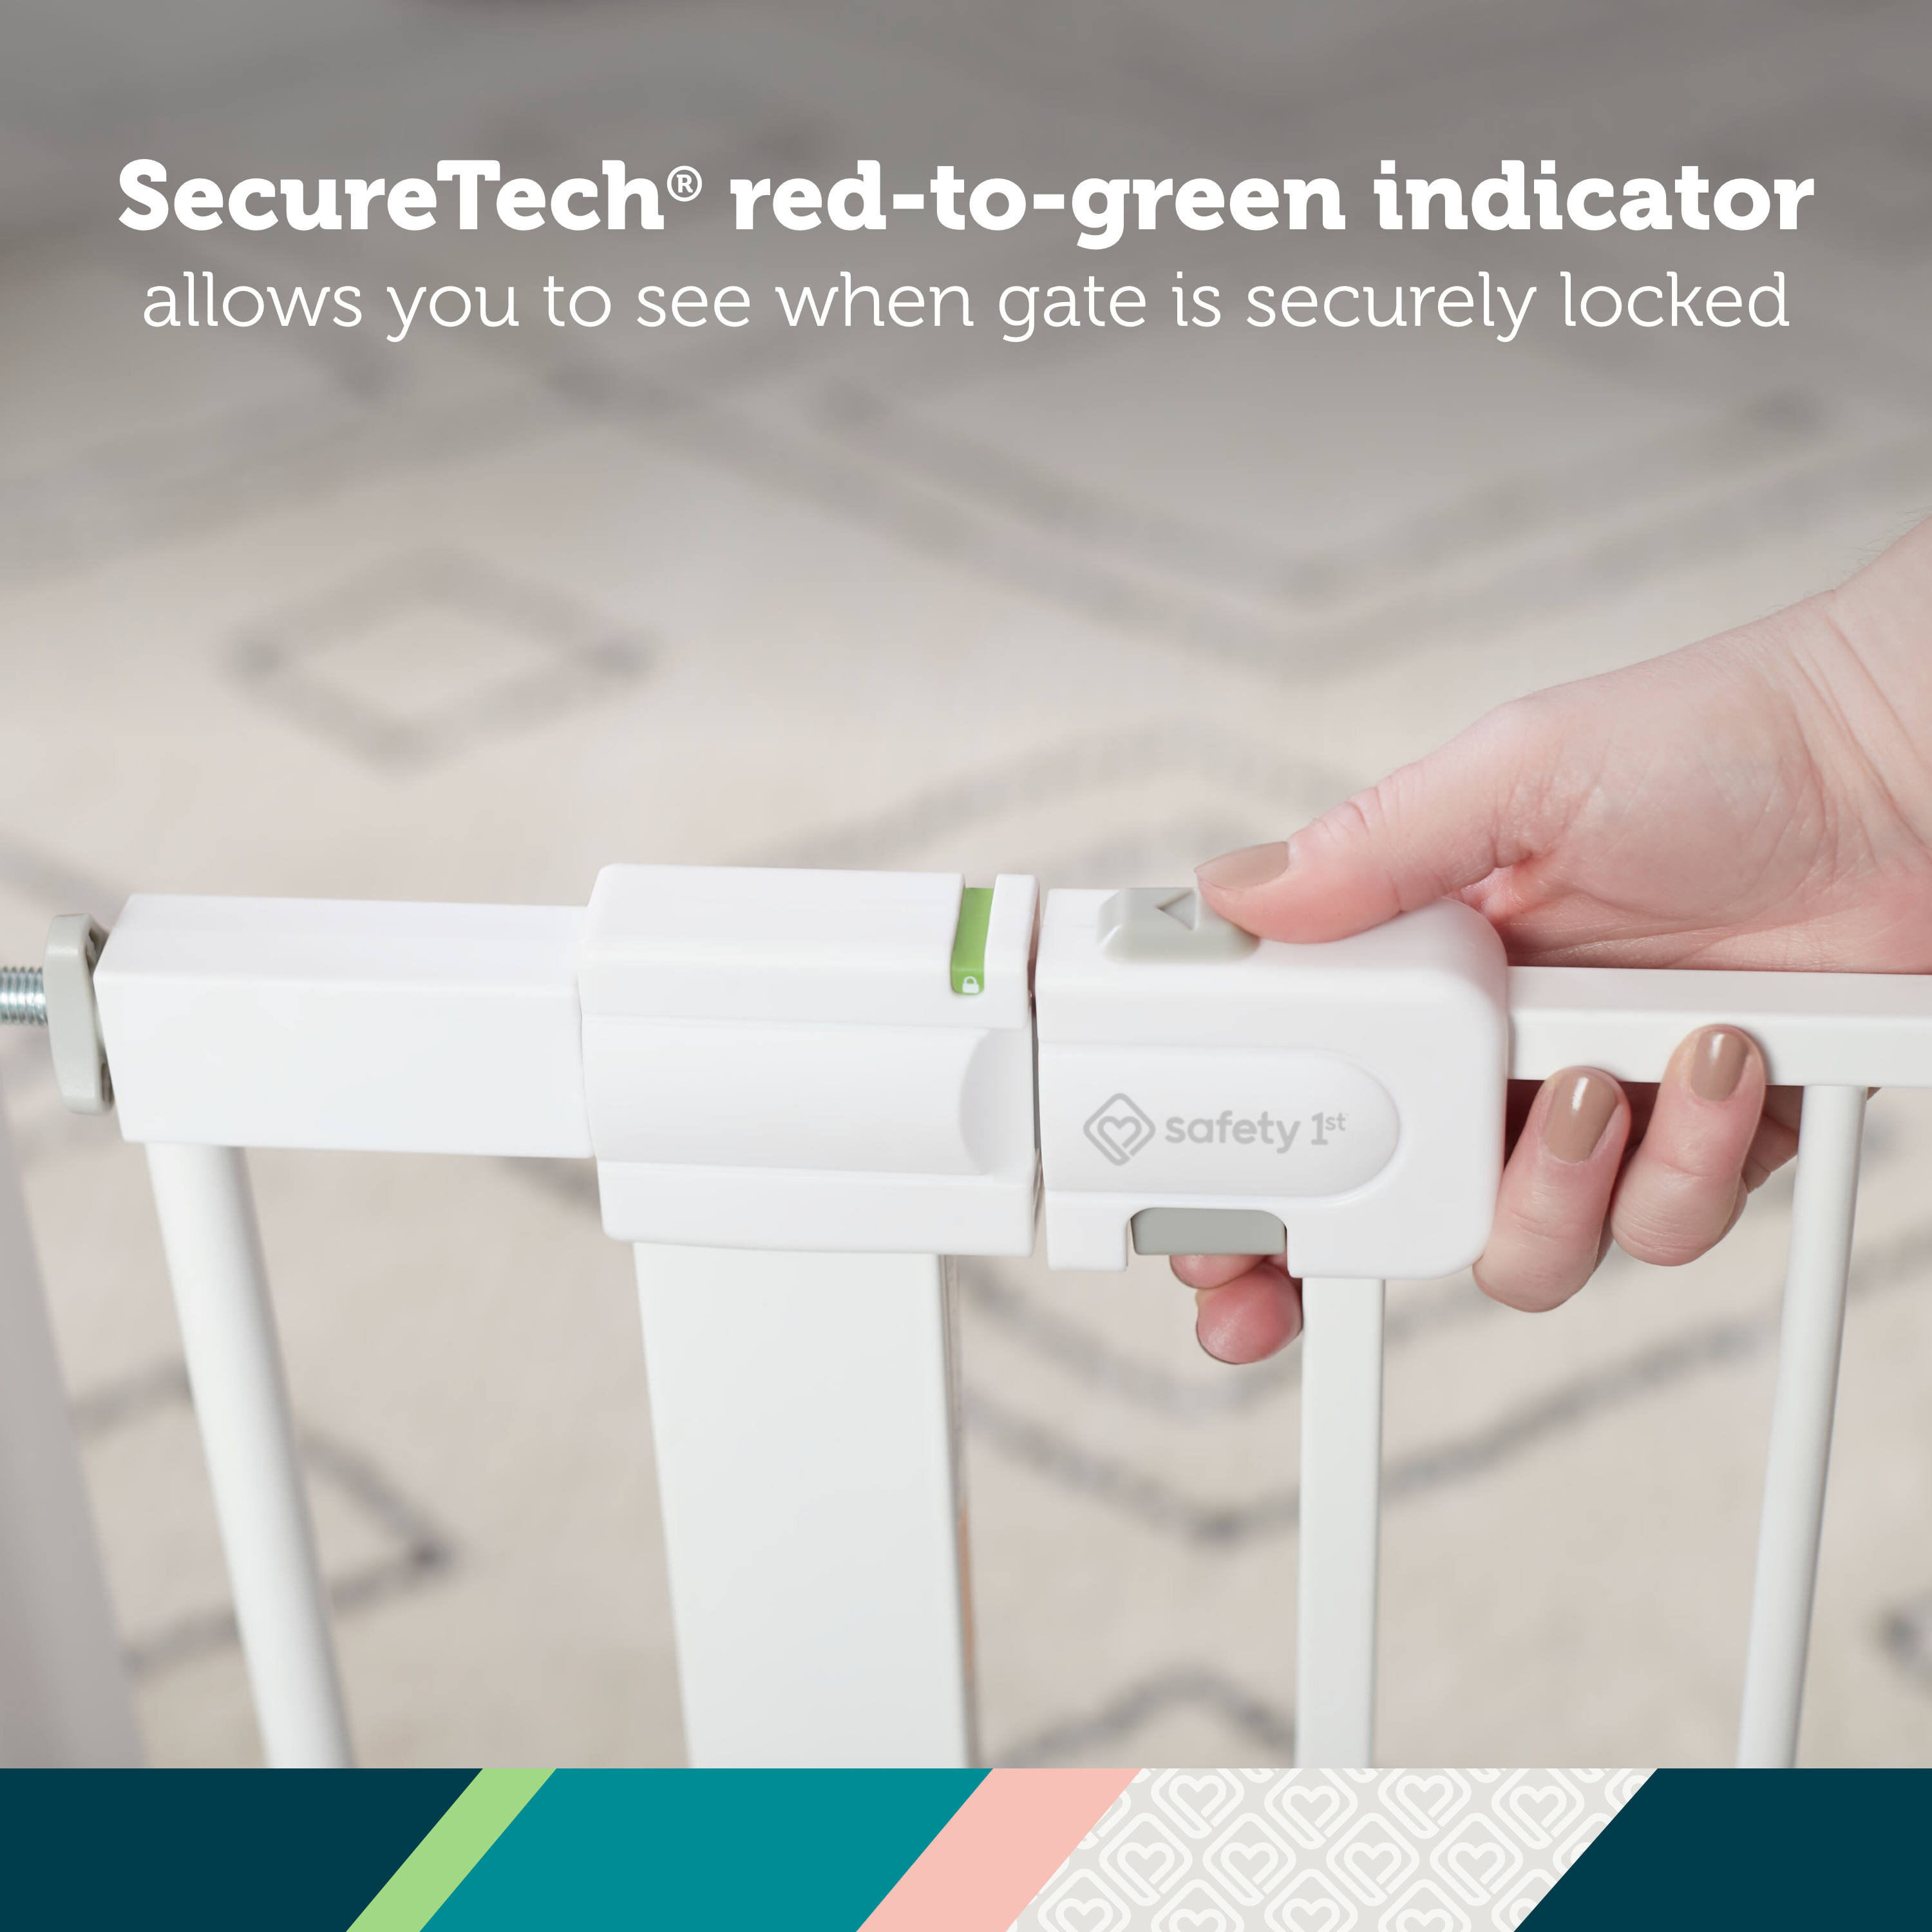 Easy Install Walk-Through Gate - SecureTech red-to-green indicator allows you to see when gate is securely locked